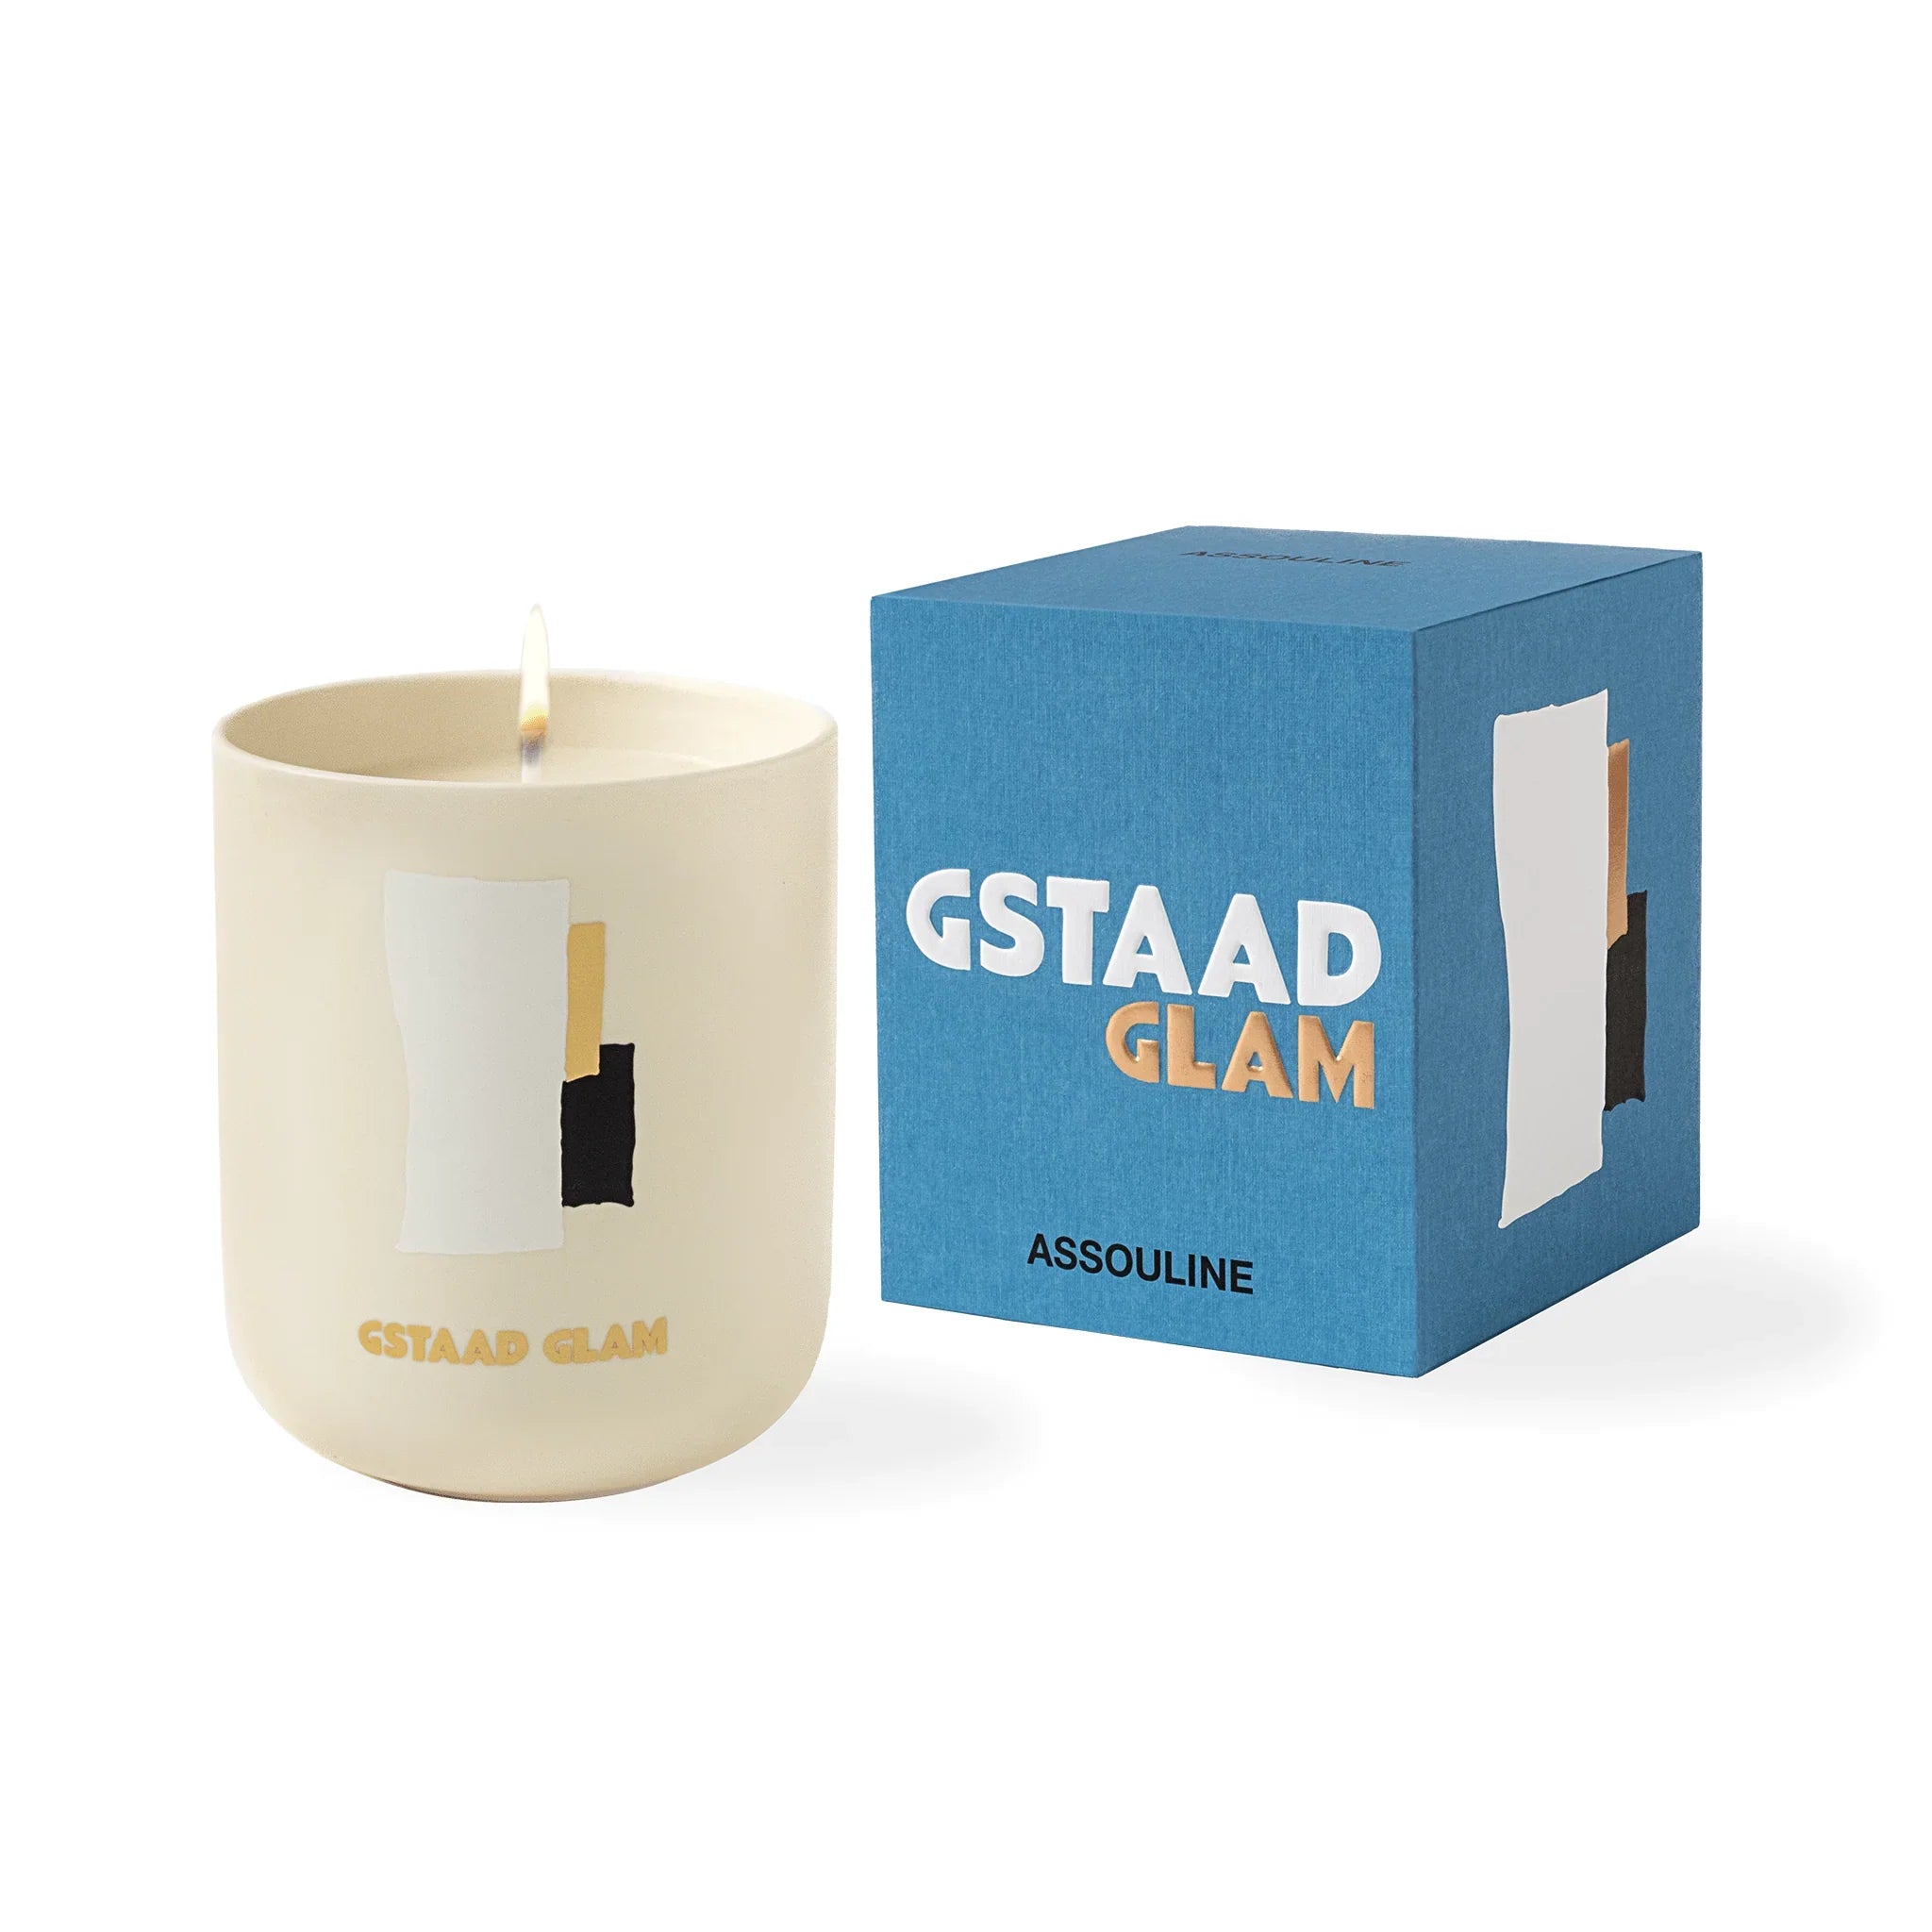 Assouline Gstaad Glam – Travel From Home Candle